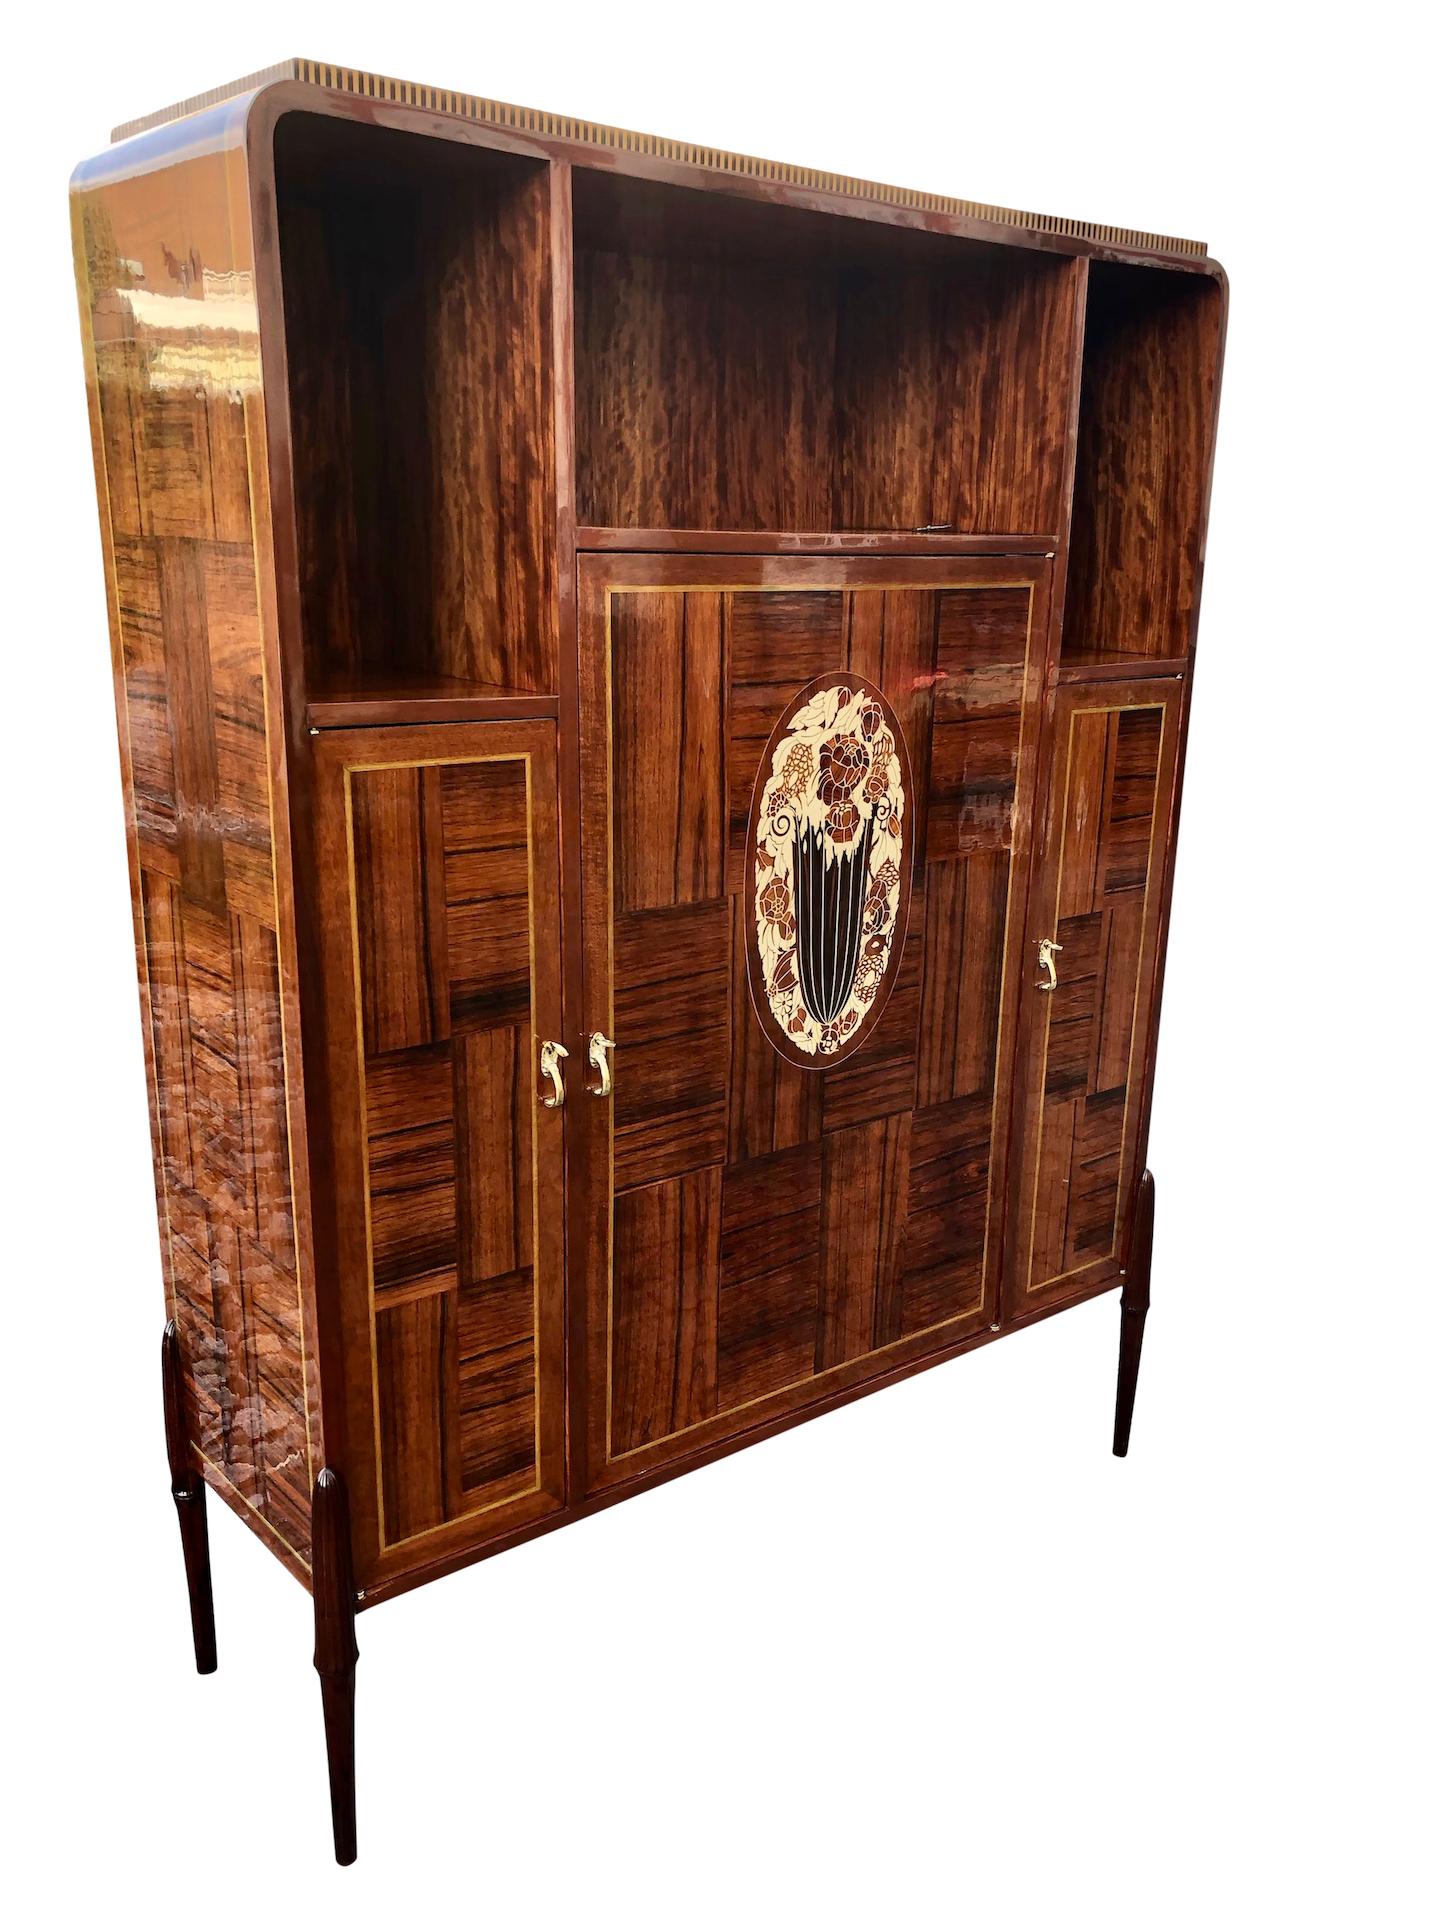 French Real Wood Veneer Art Deco Cabinet with Inlays in Style of Jacques Emile Ruhlmann For Sale